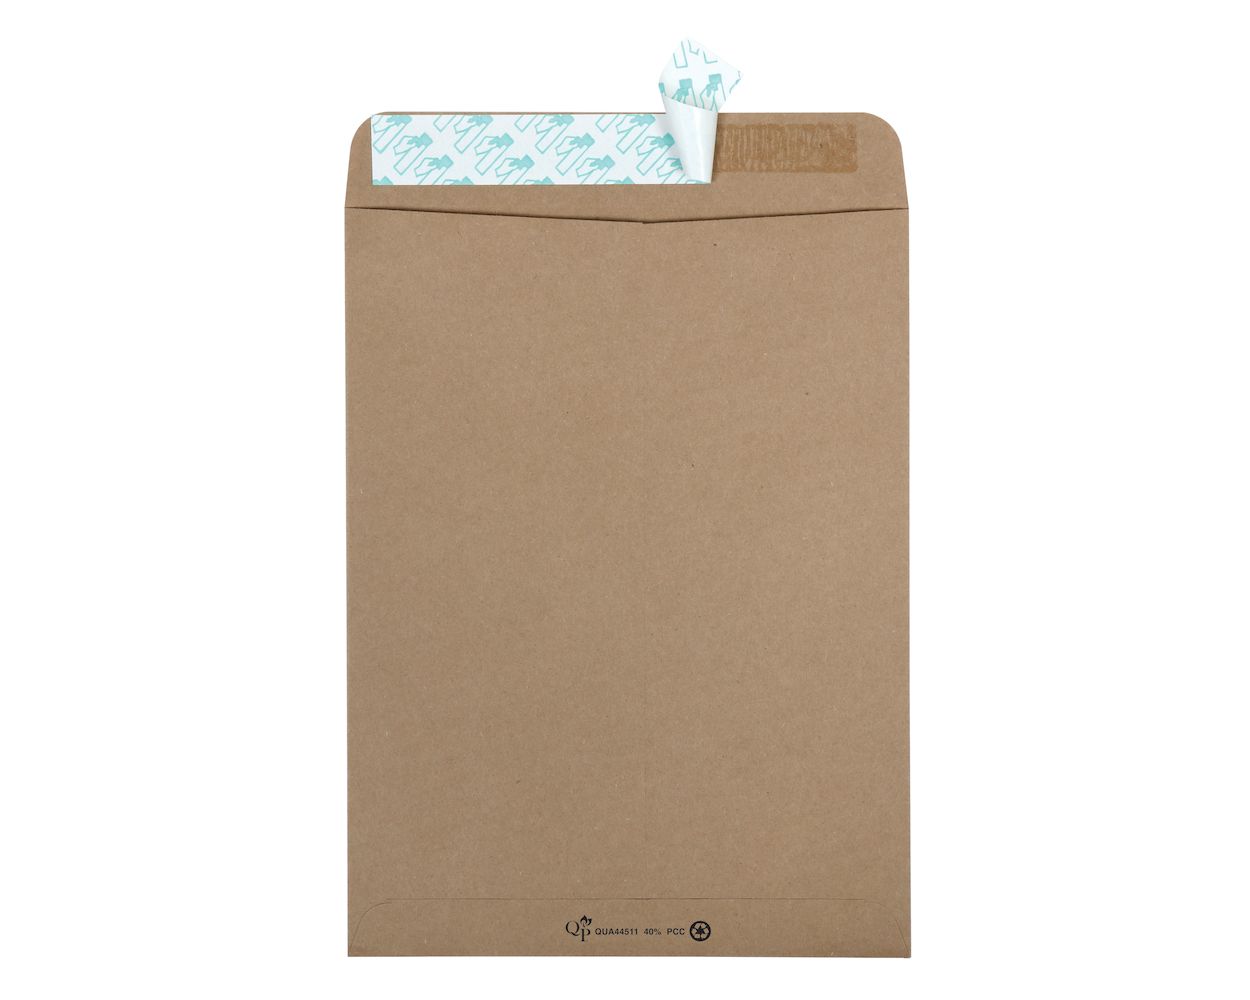 Quality Park 9 x 12 100% Recycled/40% PC Catalog Envelopes with